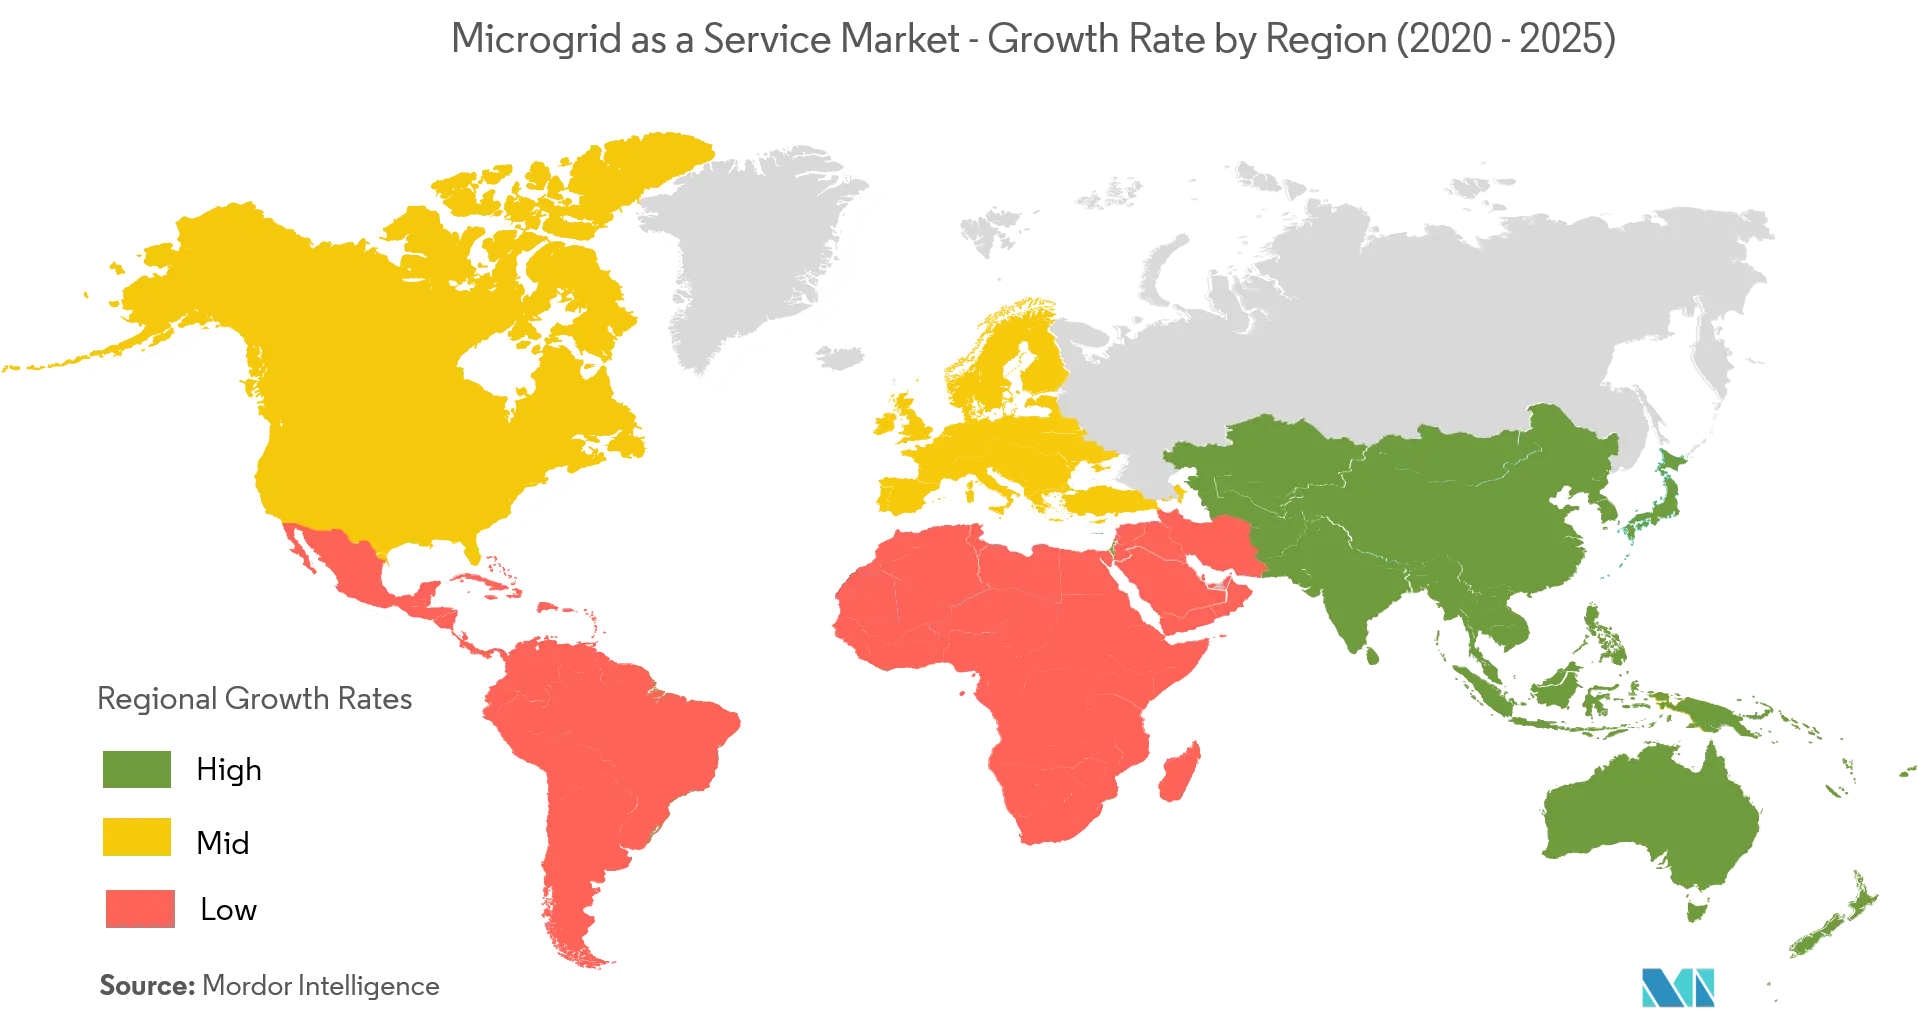 microgrid as a service market trends	